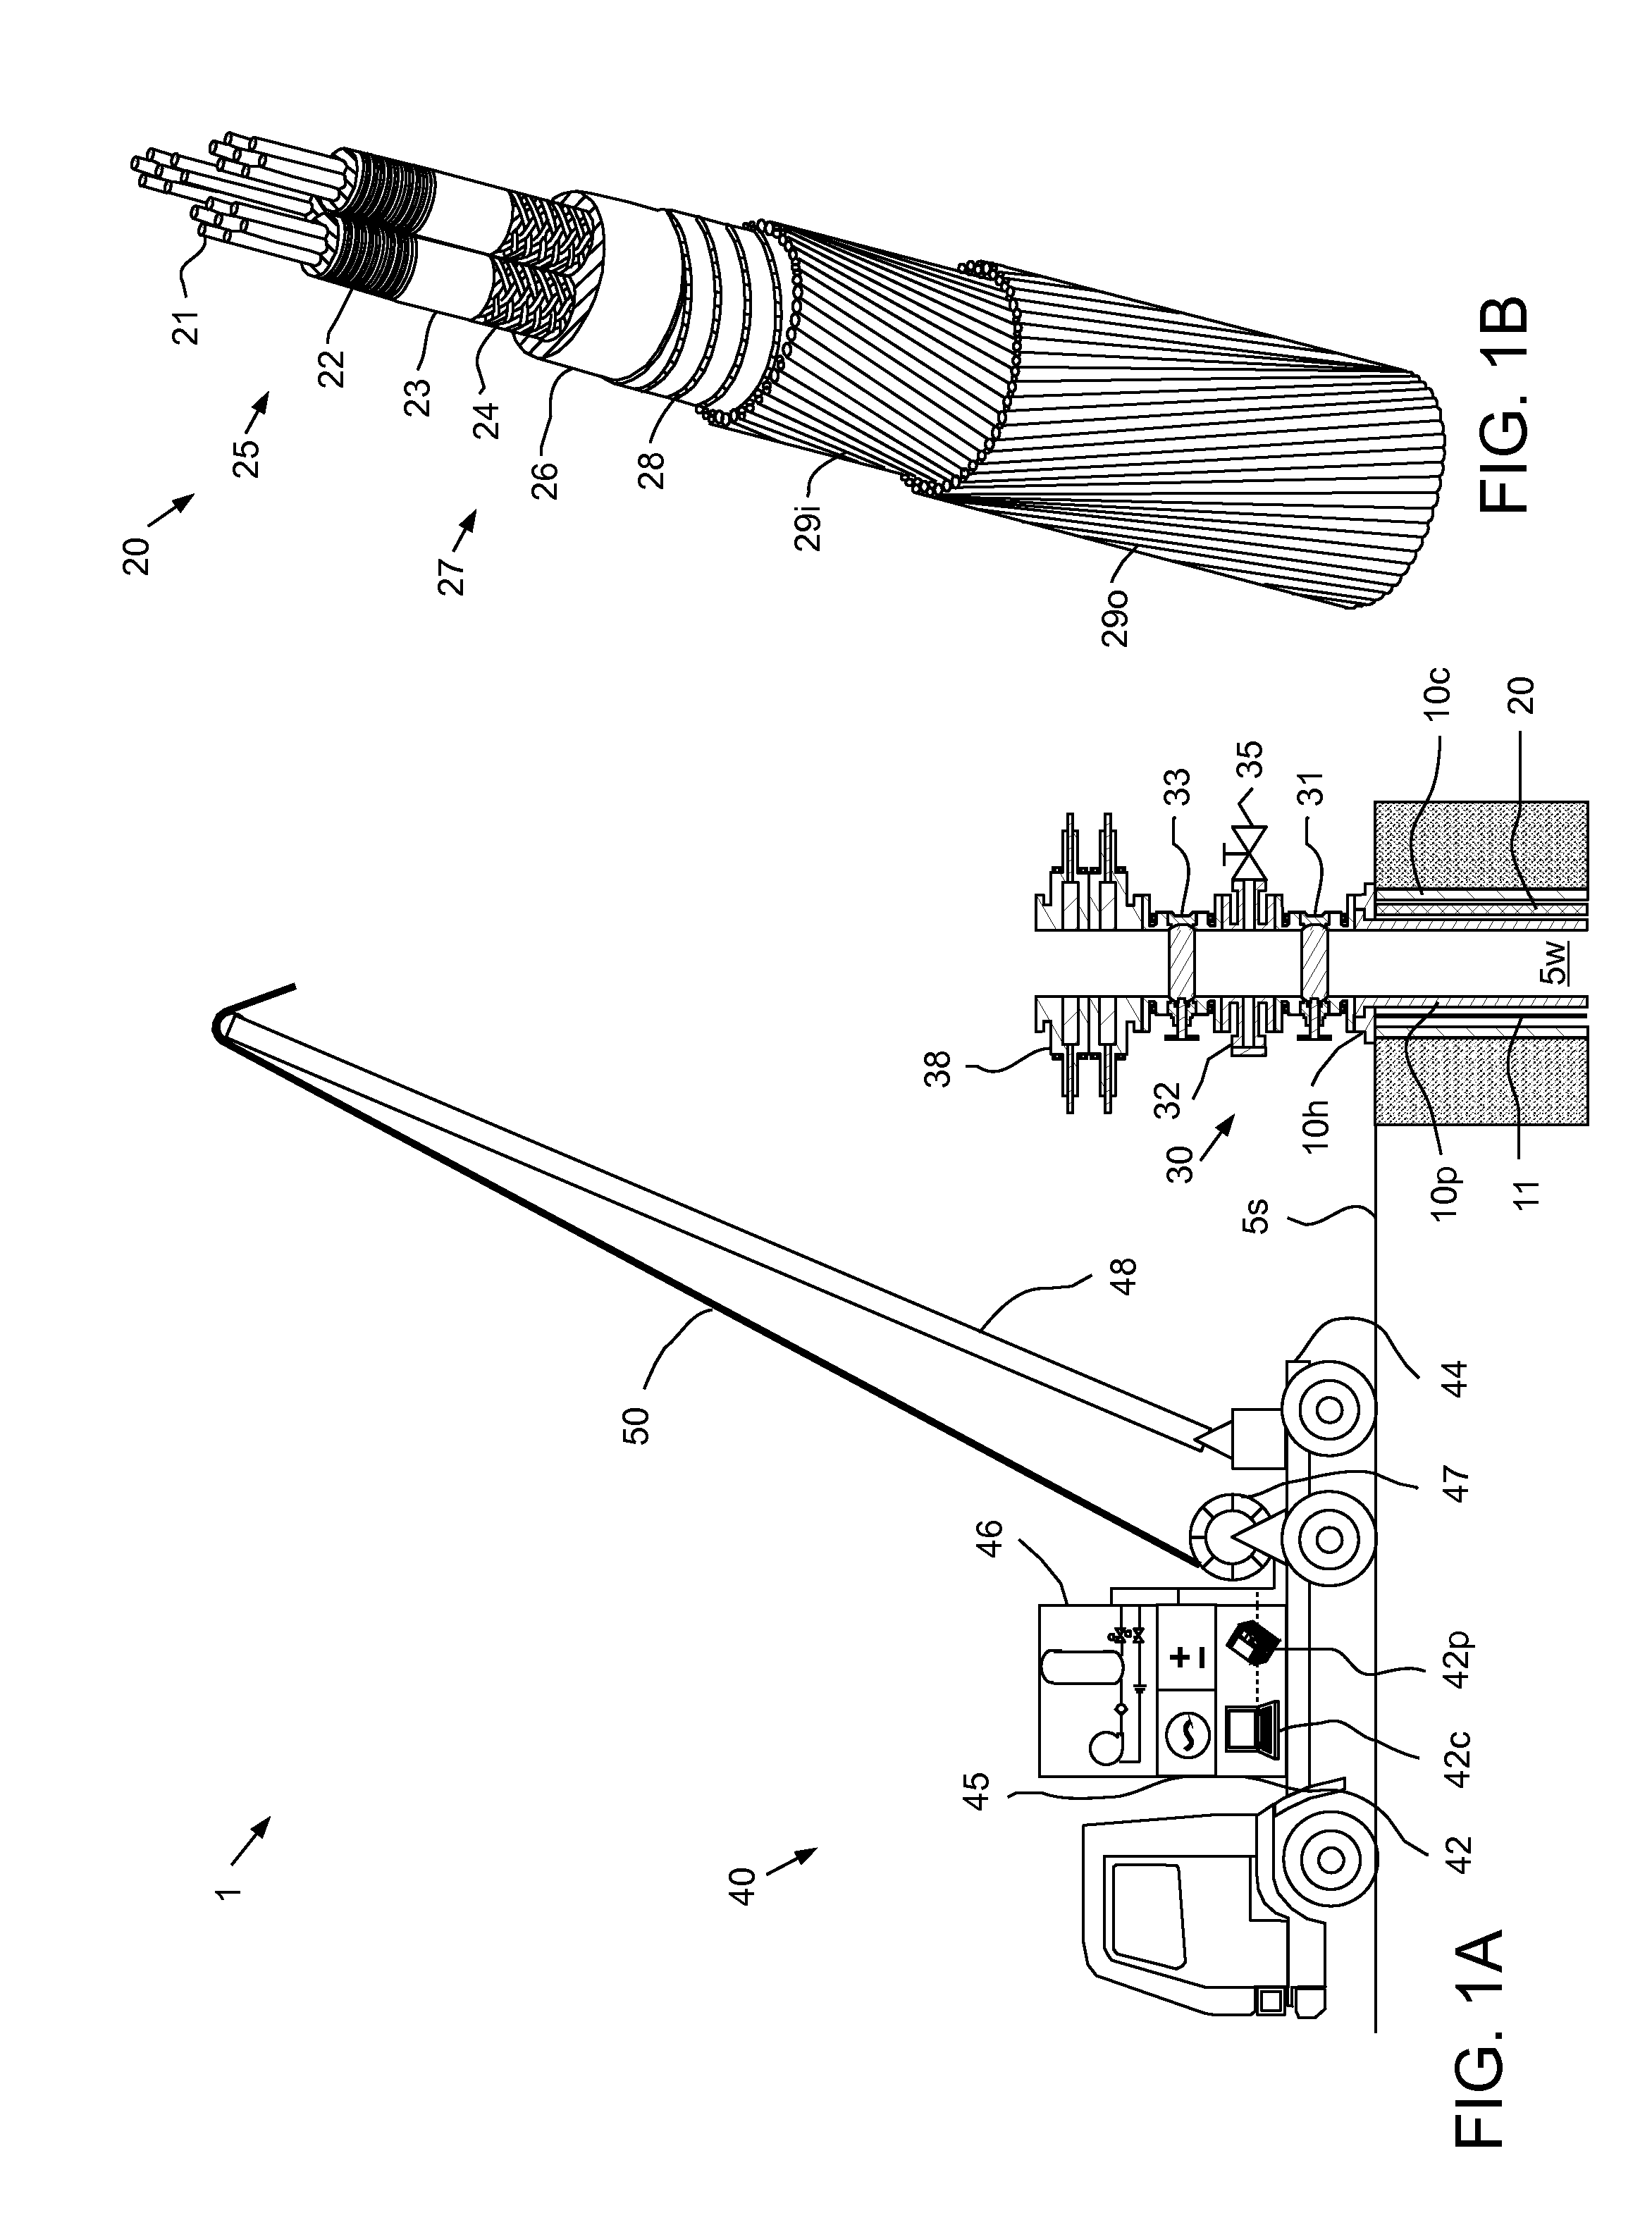 Cable injector for deploying artificial lift system